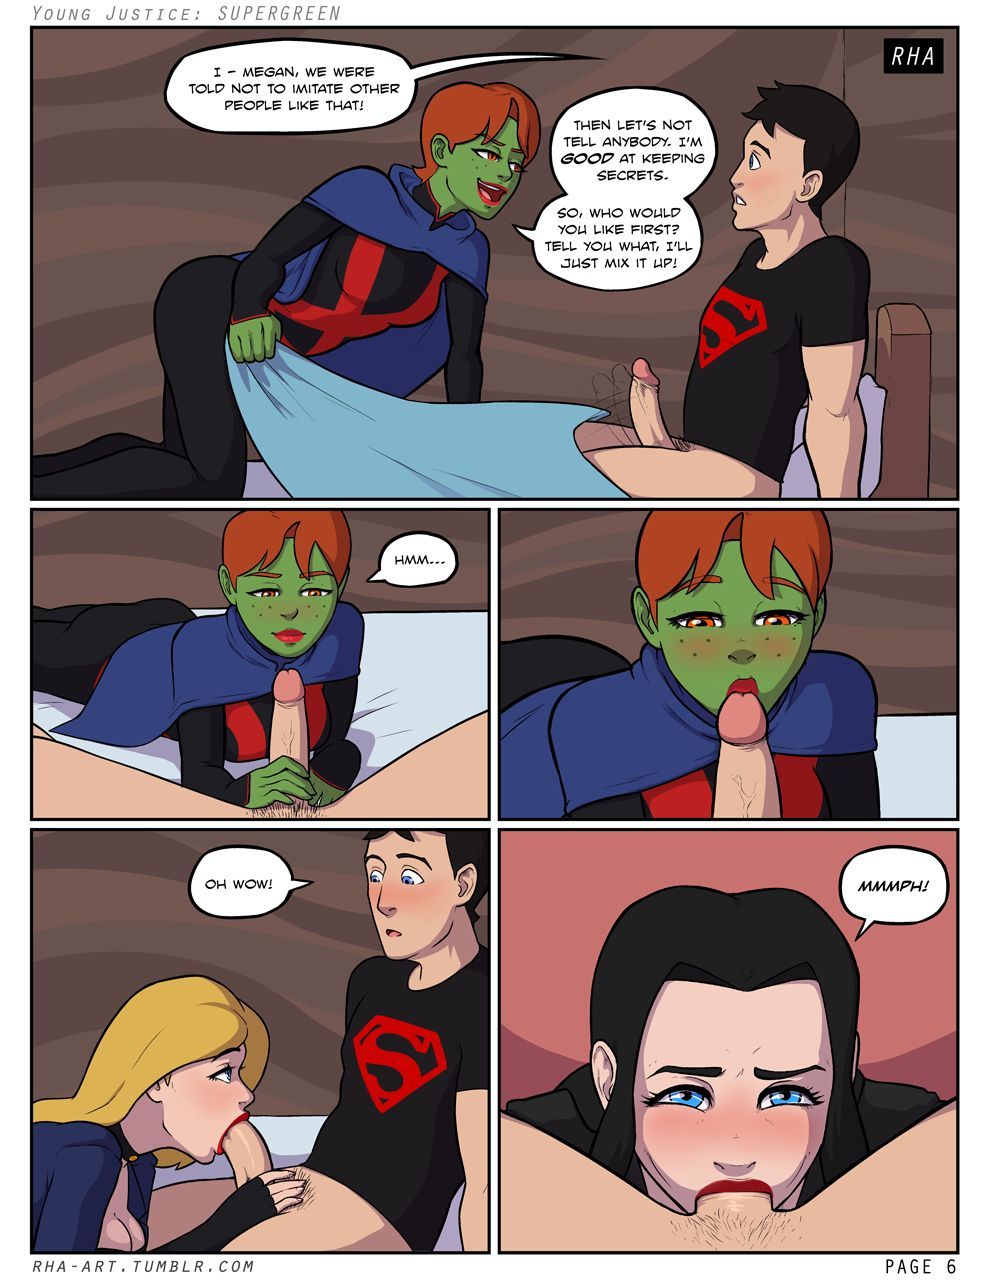 Supergreen young justice porn comic